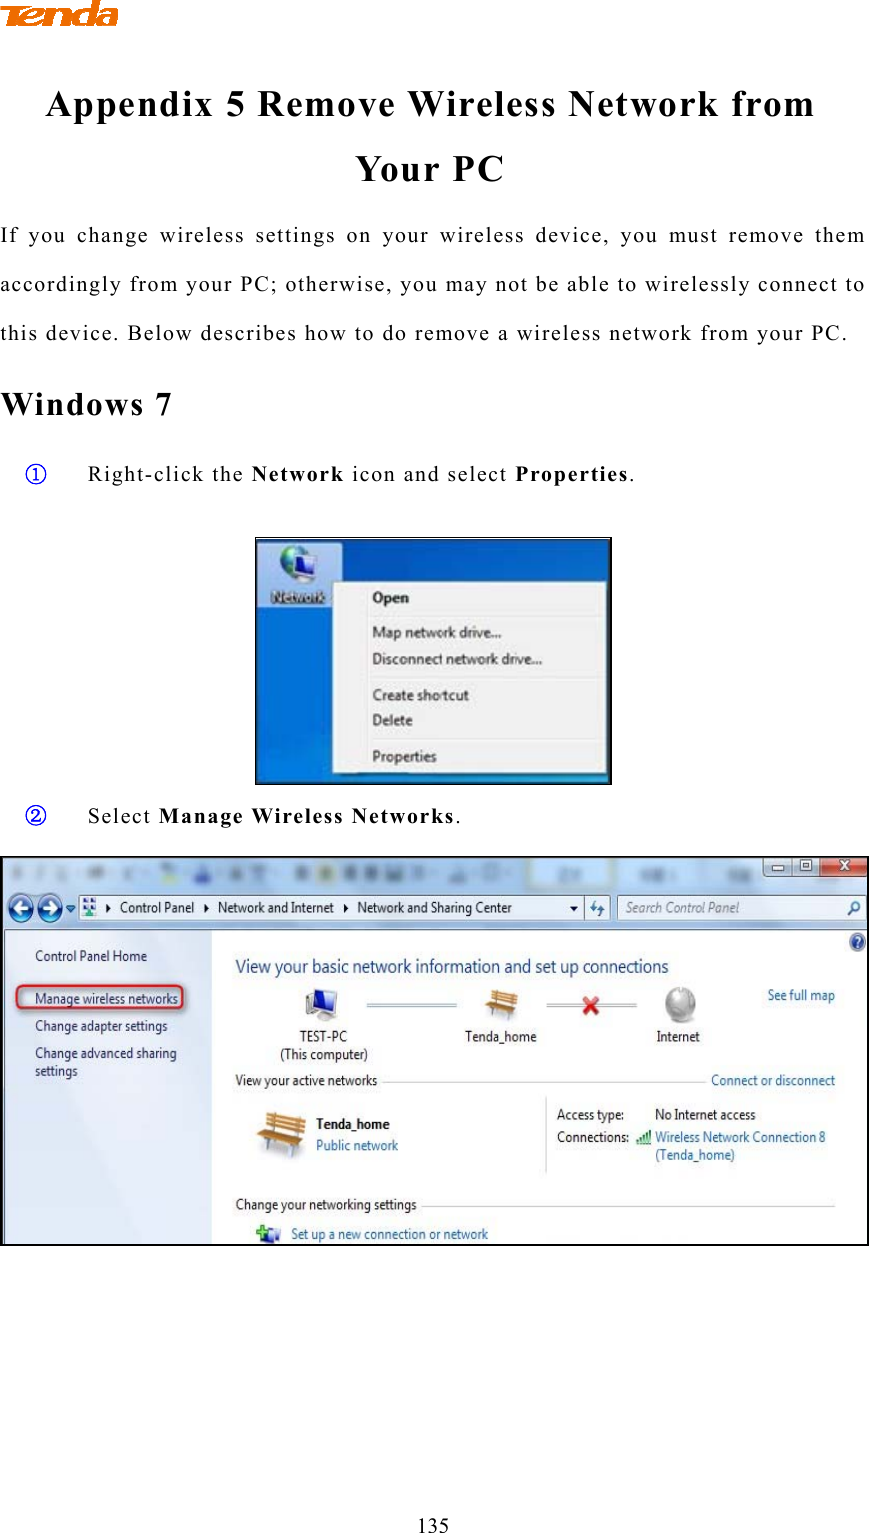                                   135 Appendix 5 Remove Wireless Network from Yo ur P C  If you change wireless settings on your wireless device, you must remove them accordingly from your PC; otherwise, you may not be able to wirelessly connect to this device. Below describes how to do remove a wireless network from your PC. Windows 7 ① Right-click the Network icon and select Properties.   ② Select Manage Wireless Networks.  